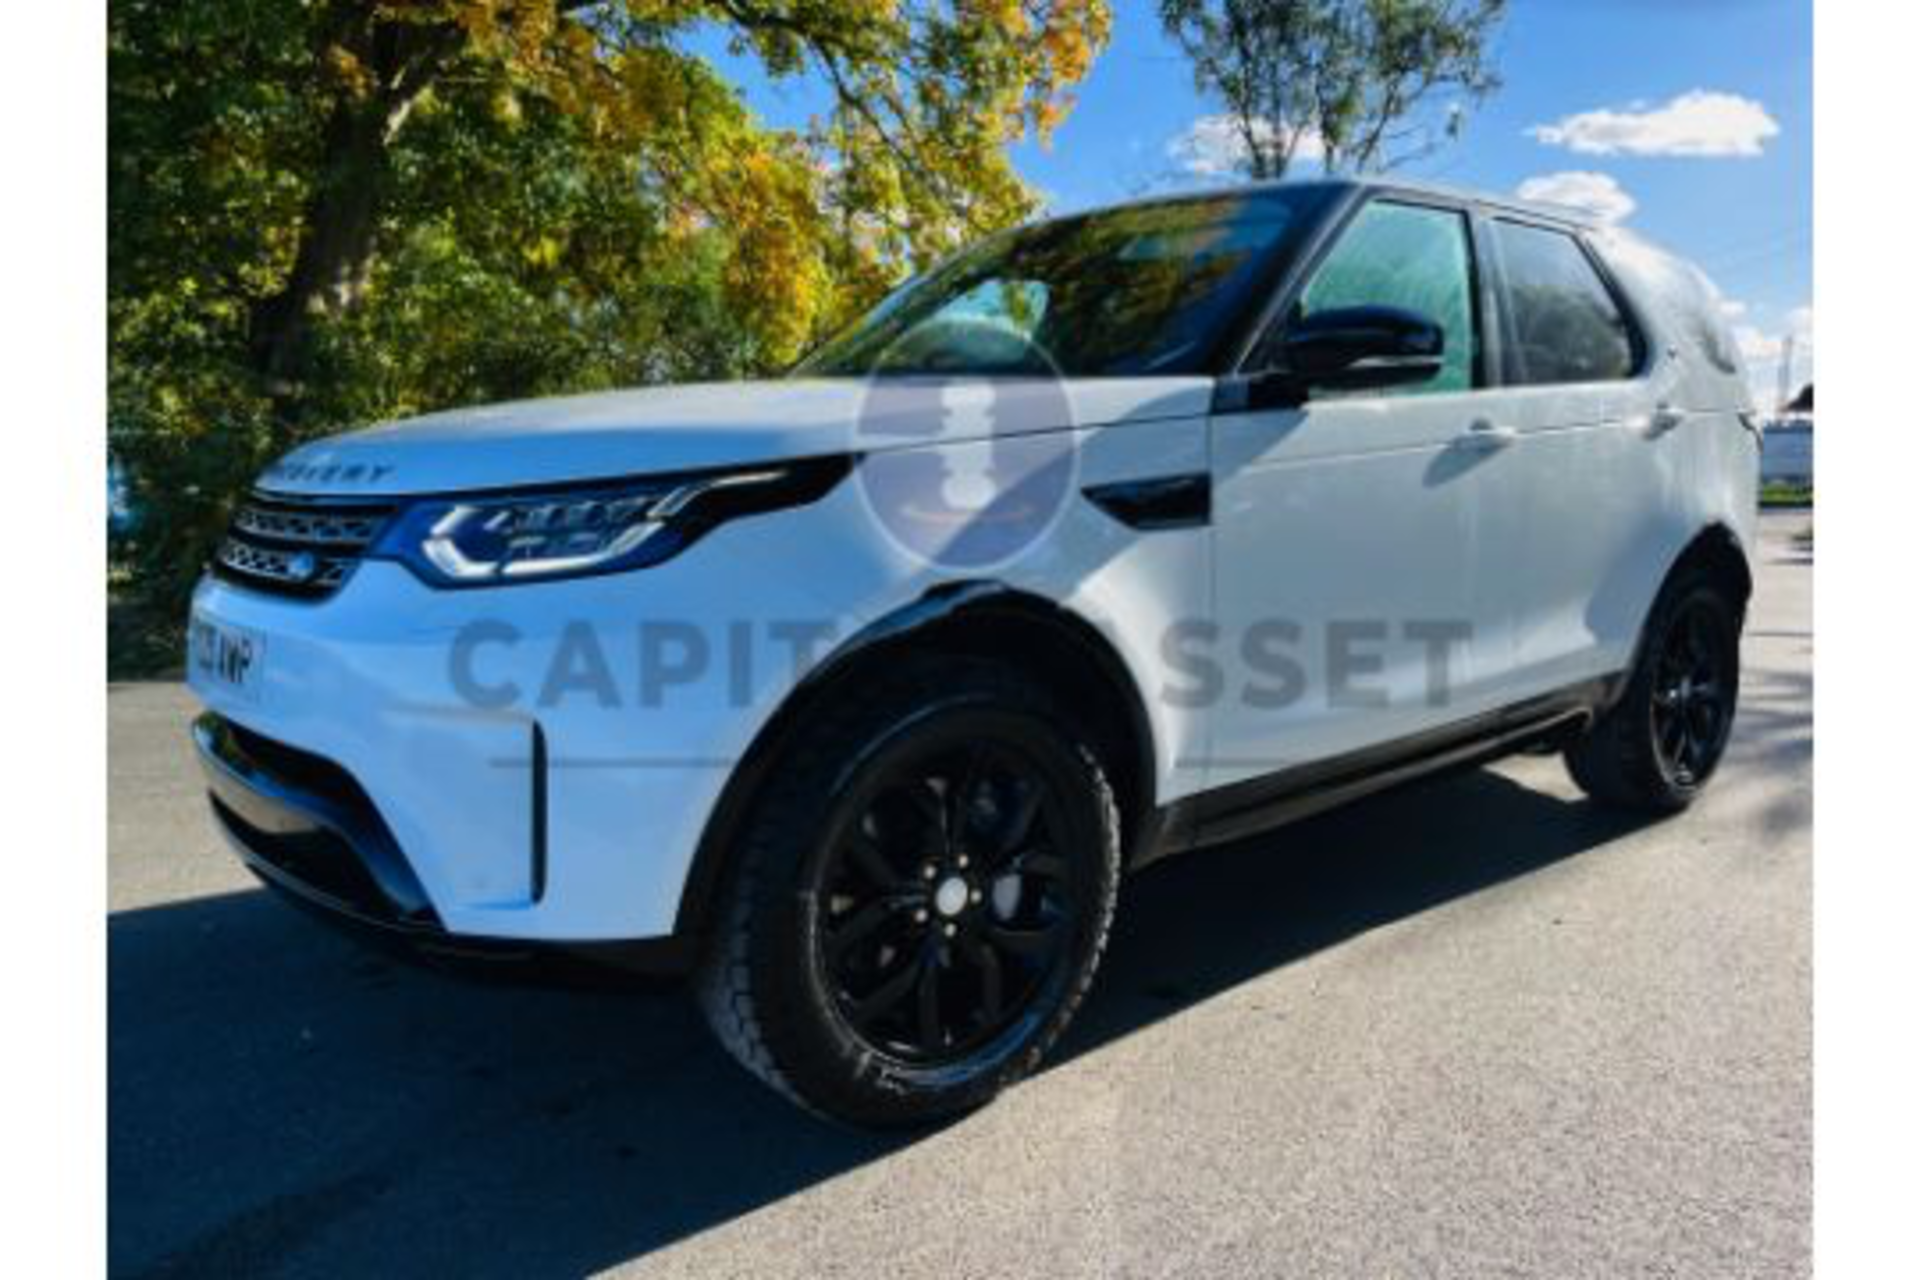 (ON SALE) LAND ROVER DISCOVERY 5 "SDV6 3.0" 'AUTO' 20 REG -1 OWNER -LEATHER- SAT NAV - NO VAT - Image 13 of 36